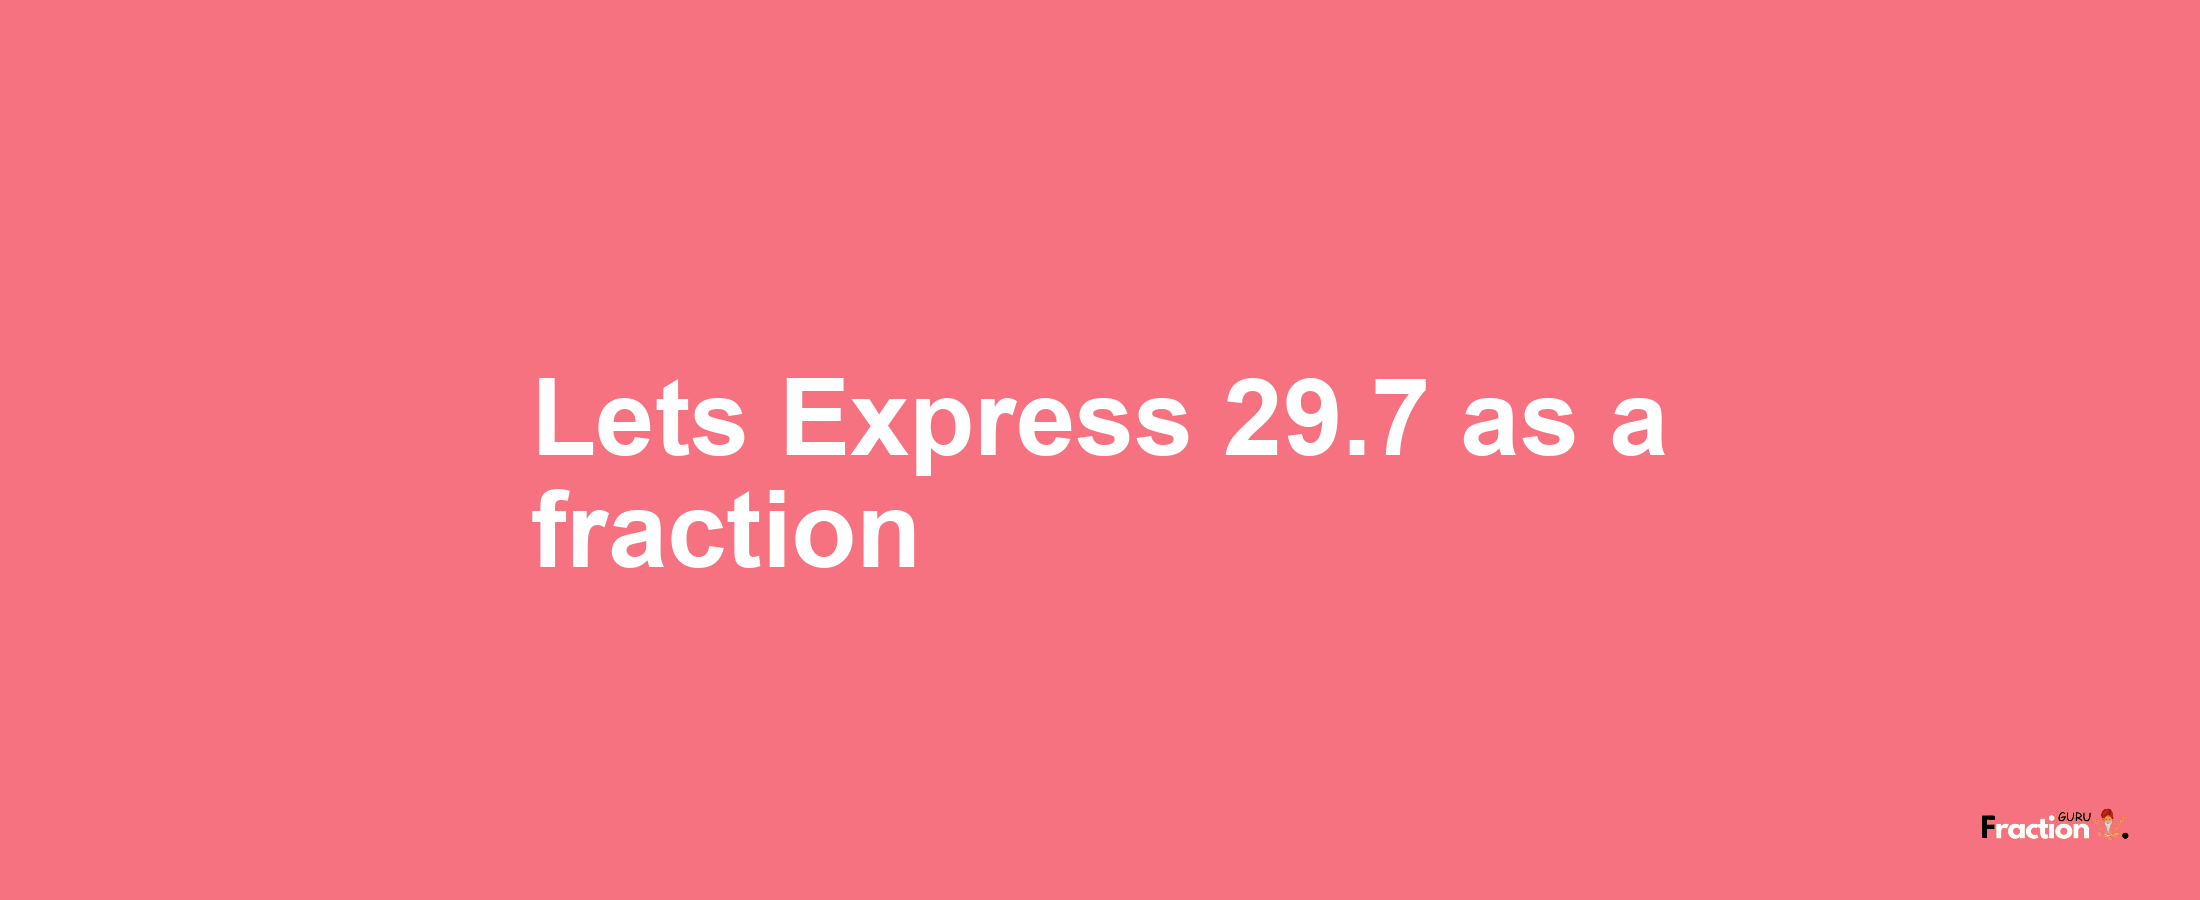 Lets Express 29.7 as afraction